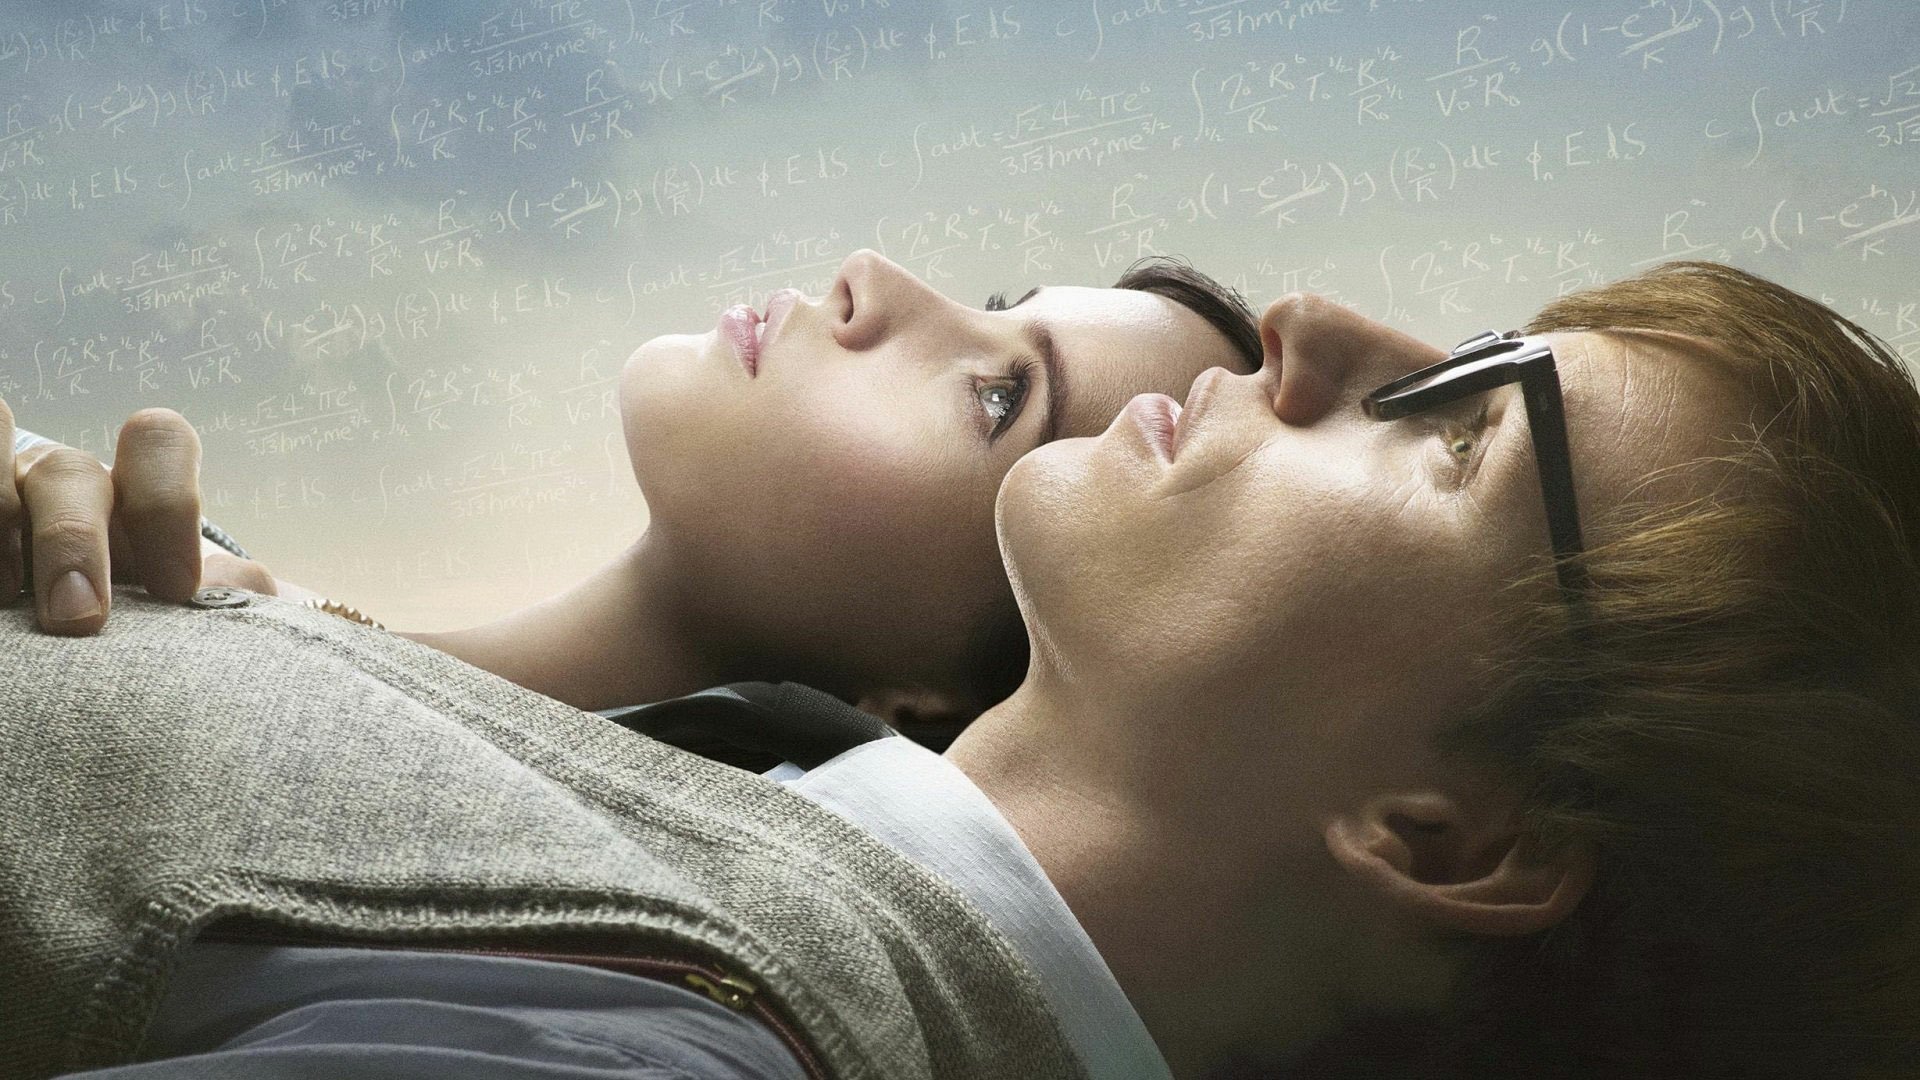 the theory of everything wallpaper